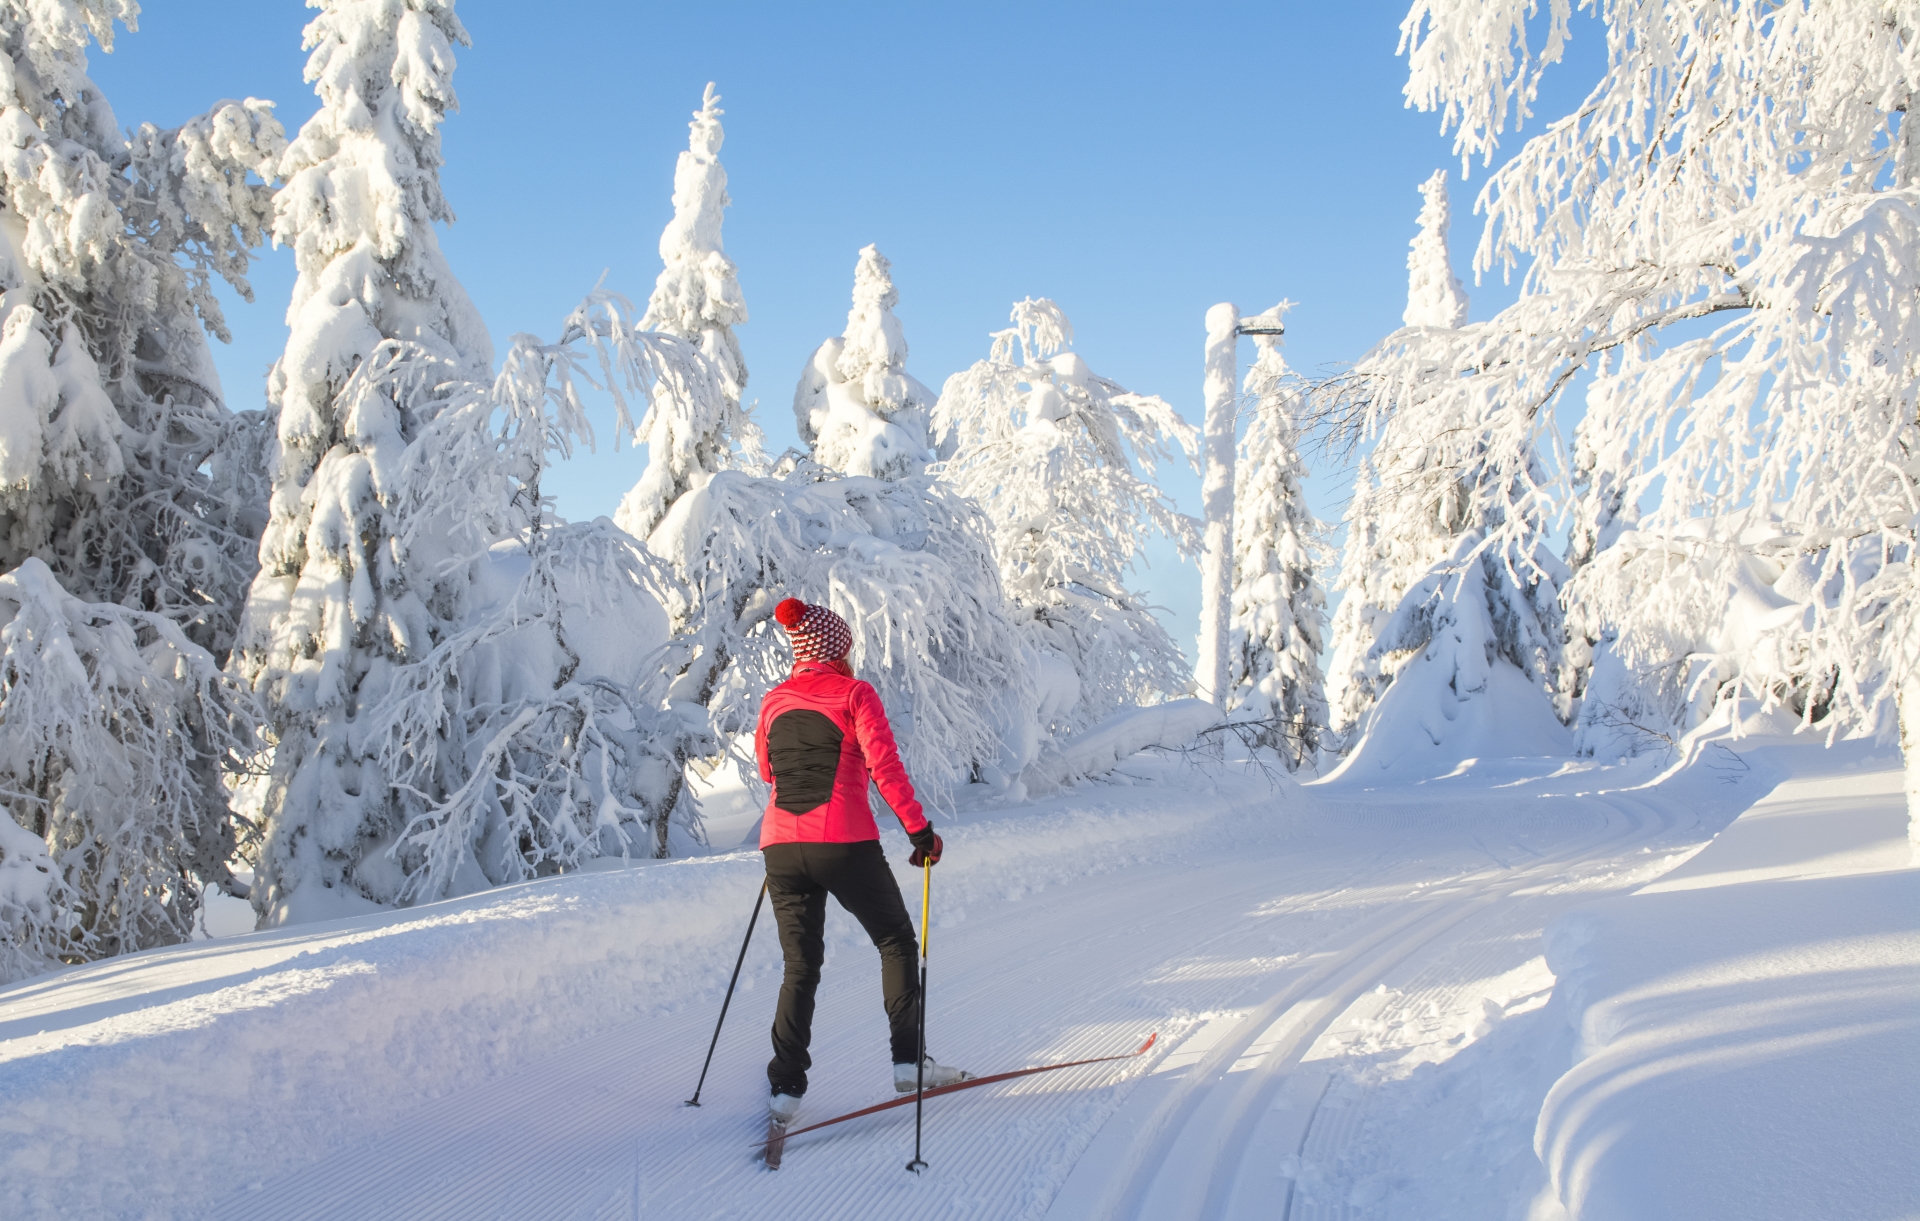 Cross-country skiing - Simply Finnish Lapland